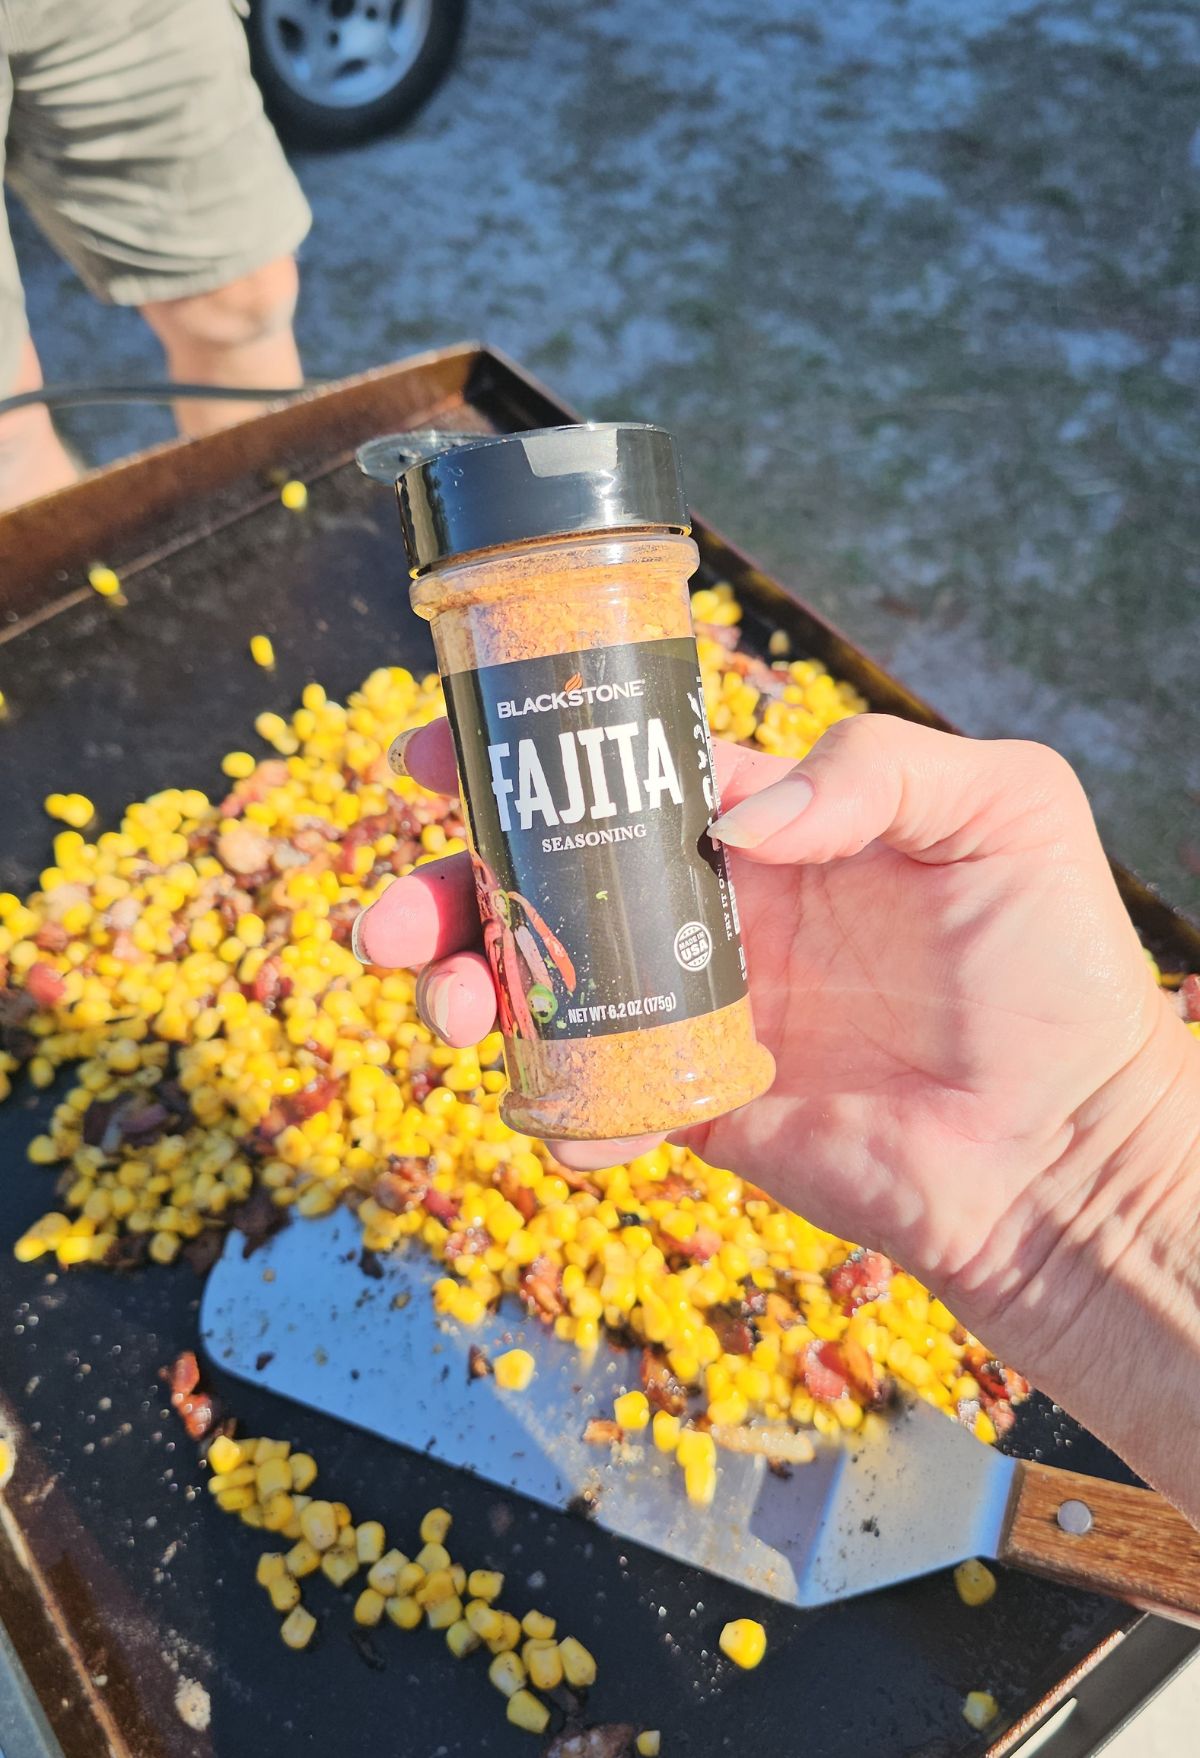 A person holding a container of fajita seasoning over a griddle full of cooking corn and peppers.